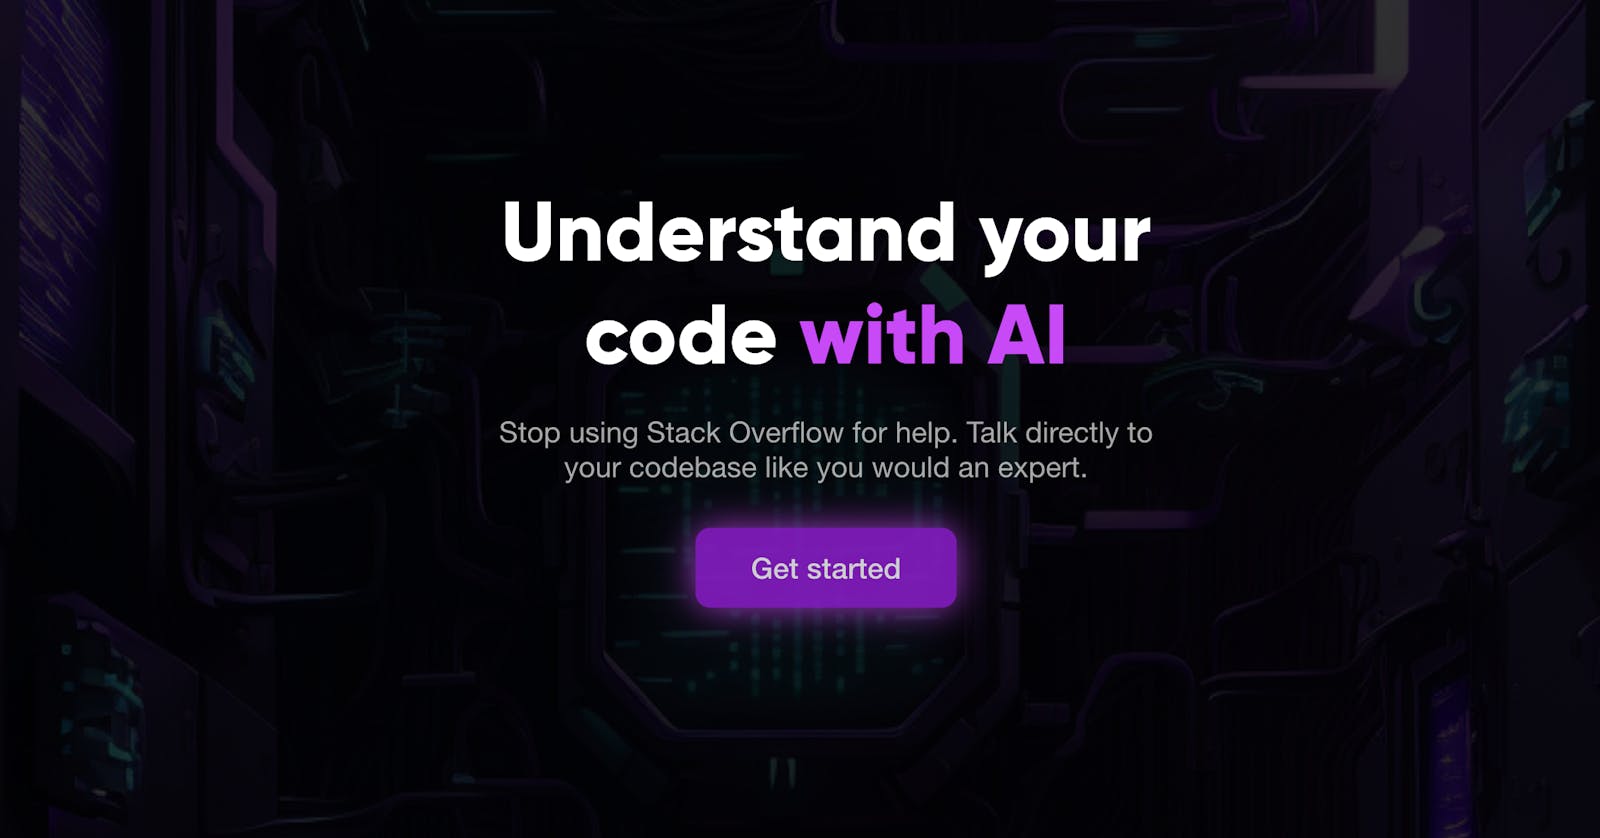 Adrenaline.ai wants you to talk to your codebase.